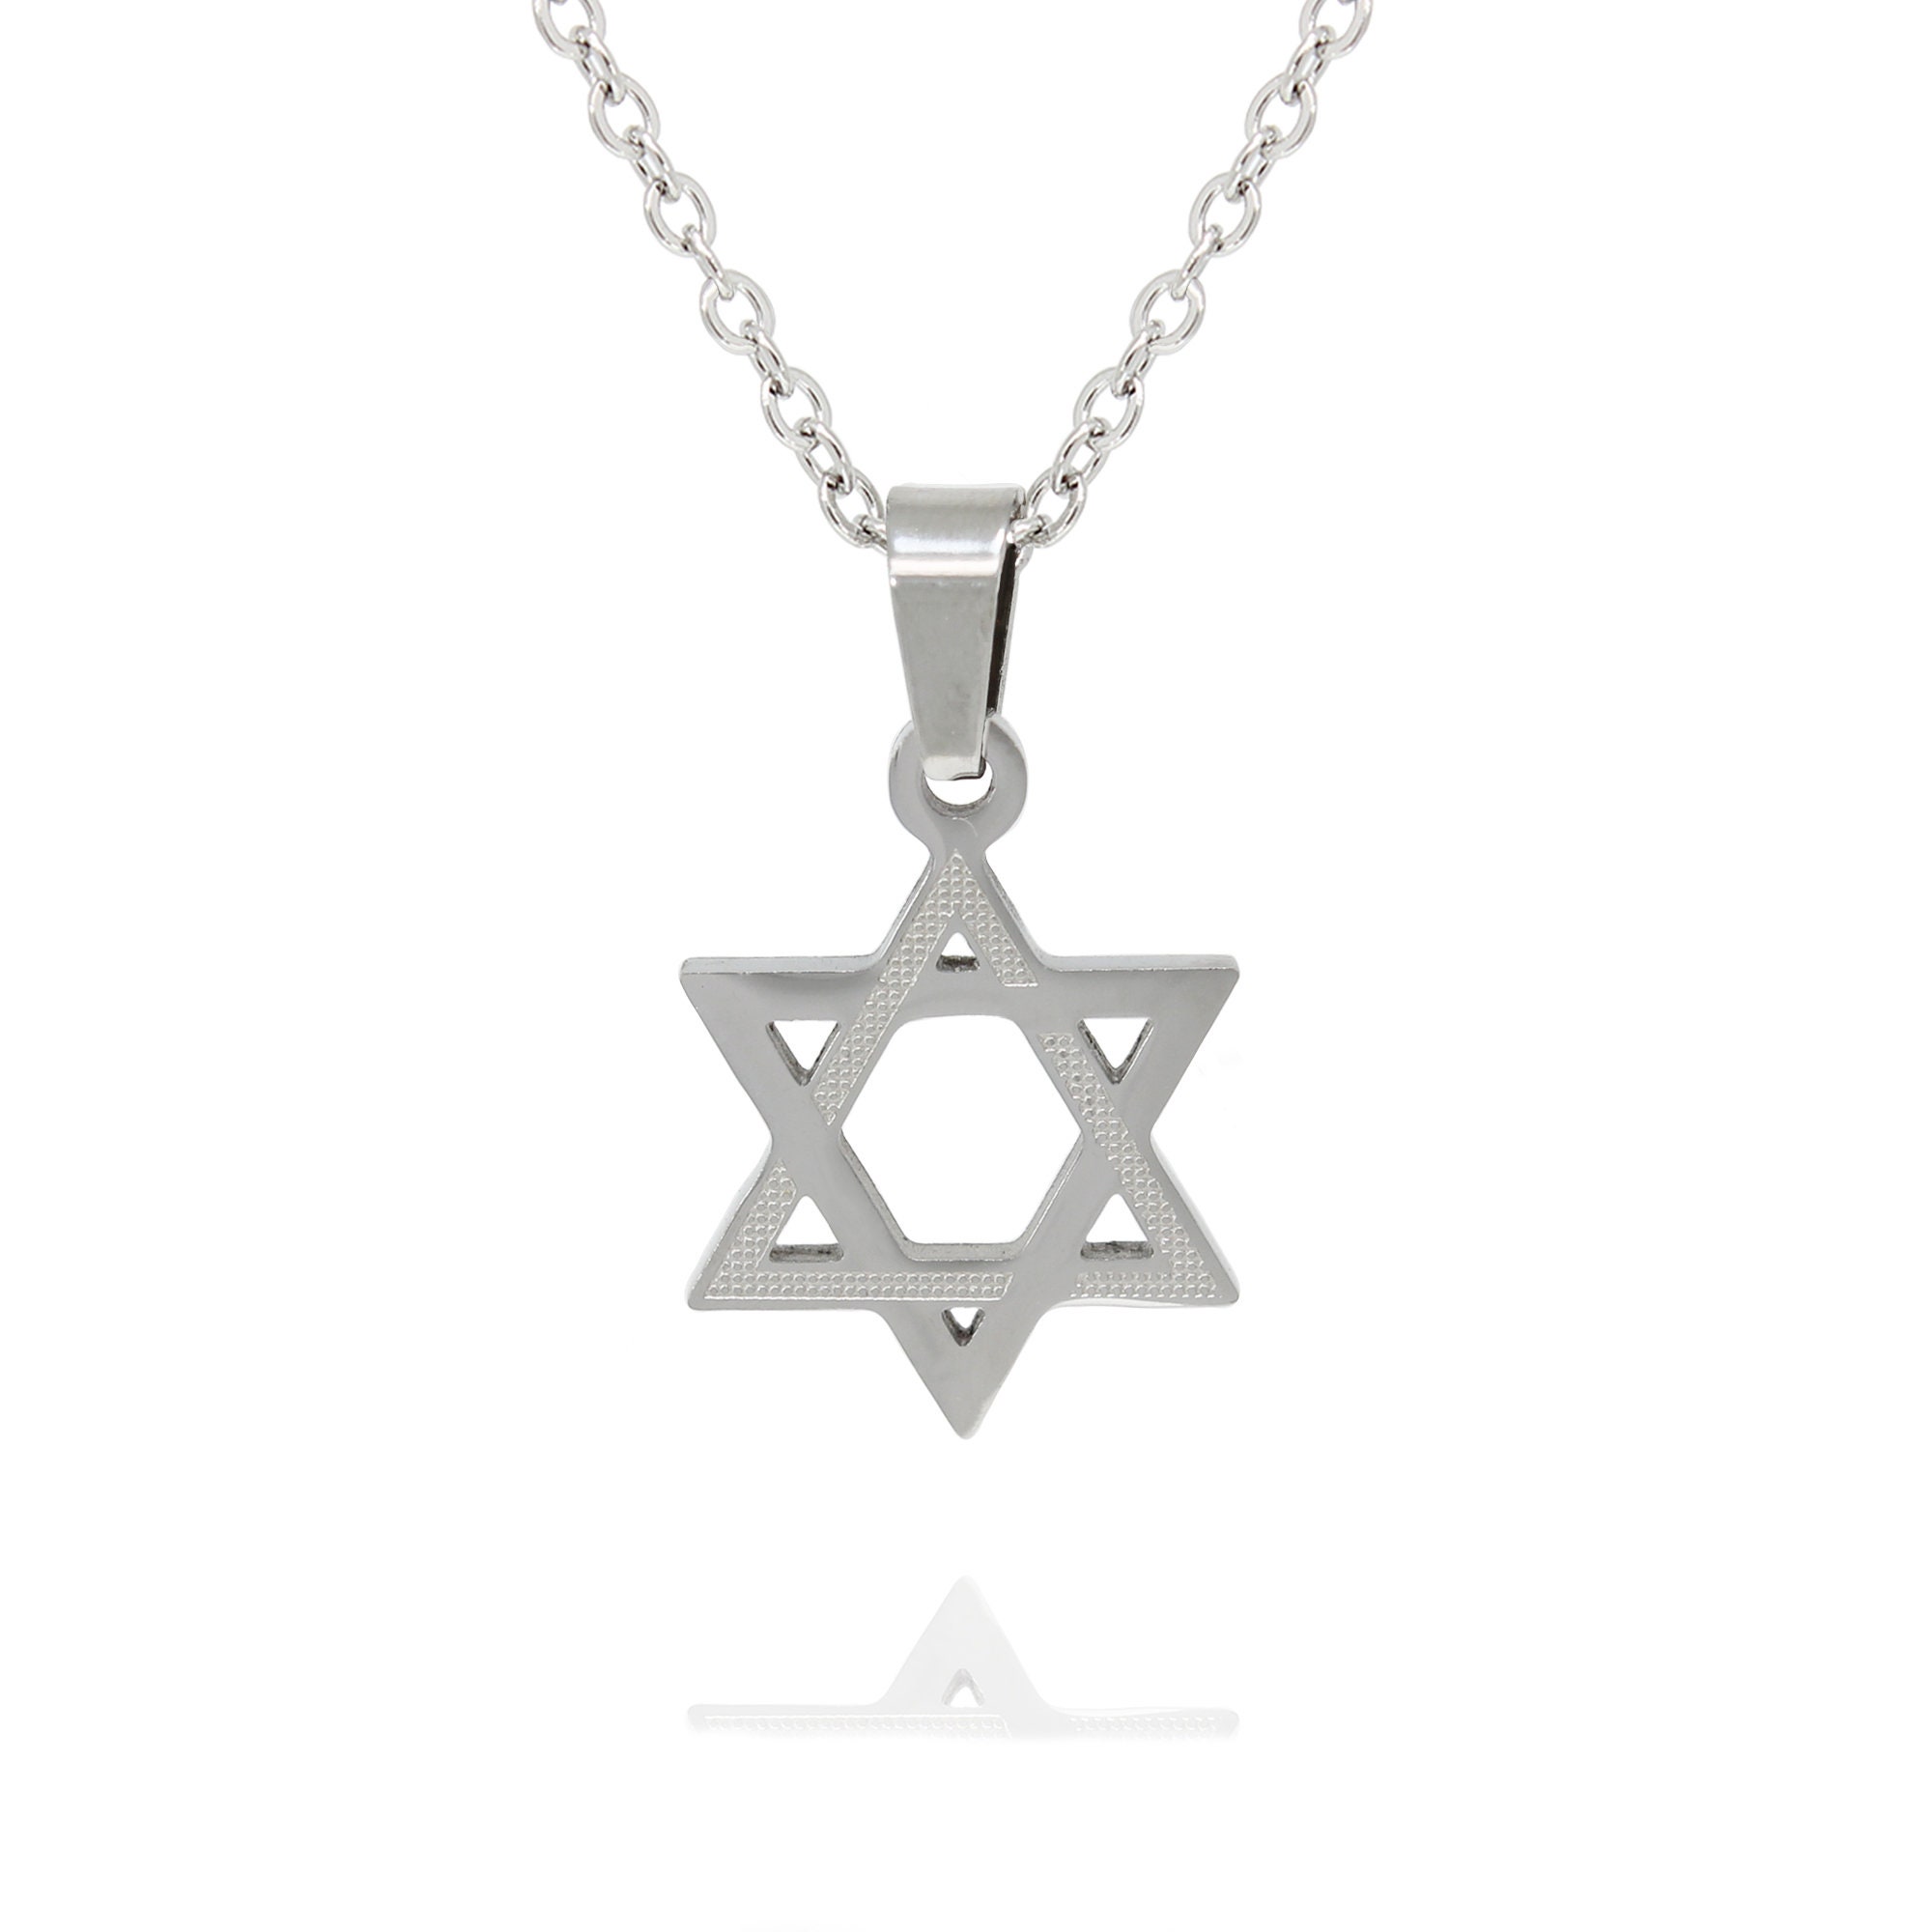 22" Stainless Steel Two-Tone Jewish Star of David Boys Mens Pendant Necklace 